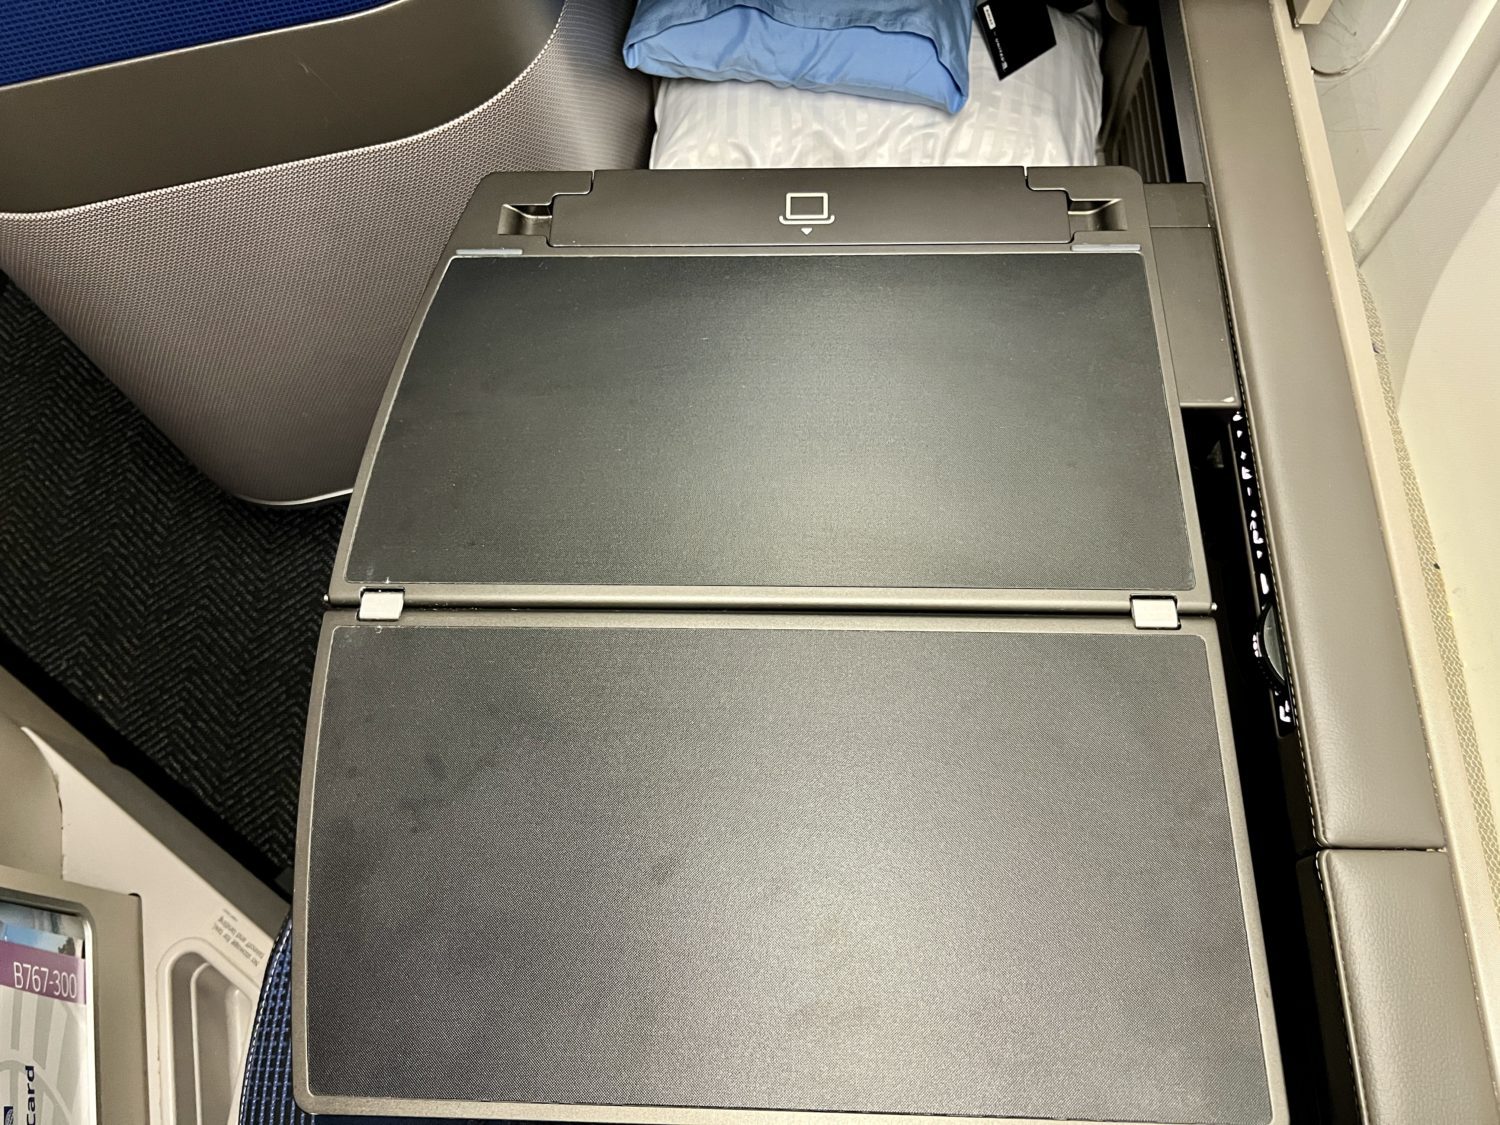 united polaris tray table  United Polaris Business Class Review on the 767-300ER &#8211; Thrifty Traveler united polaris tray table scaled